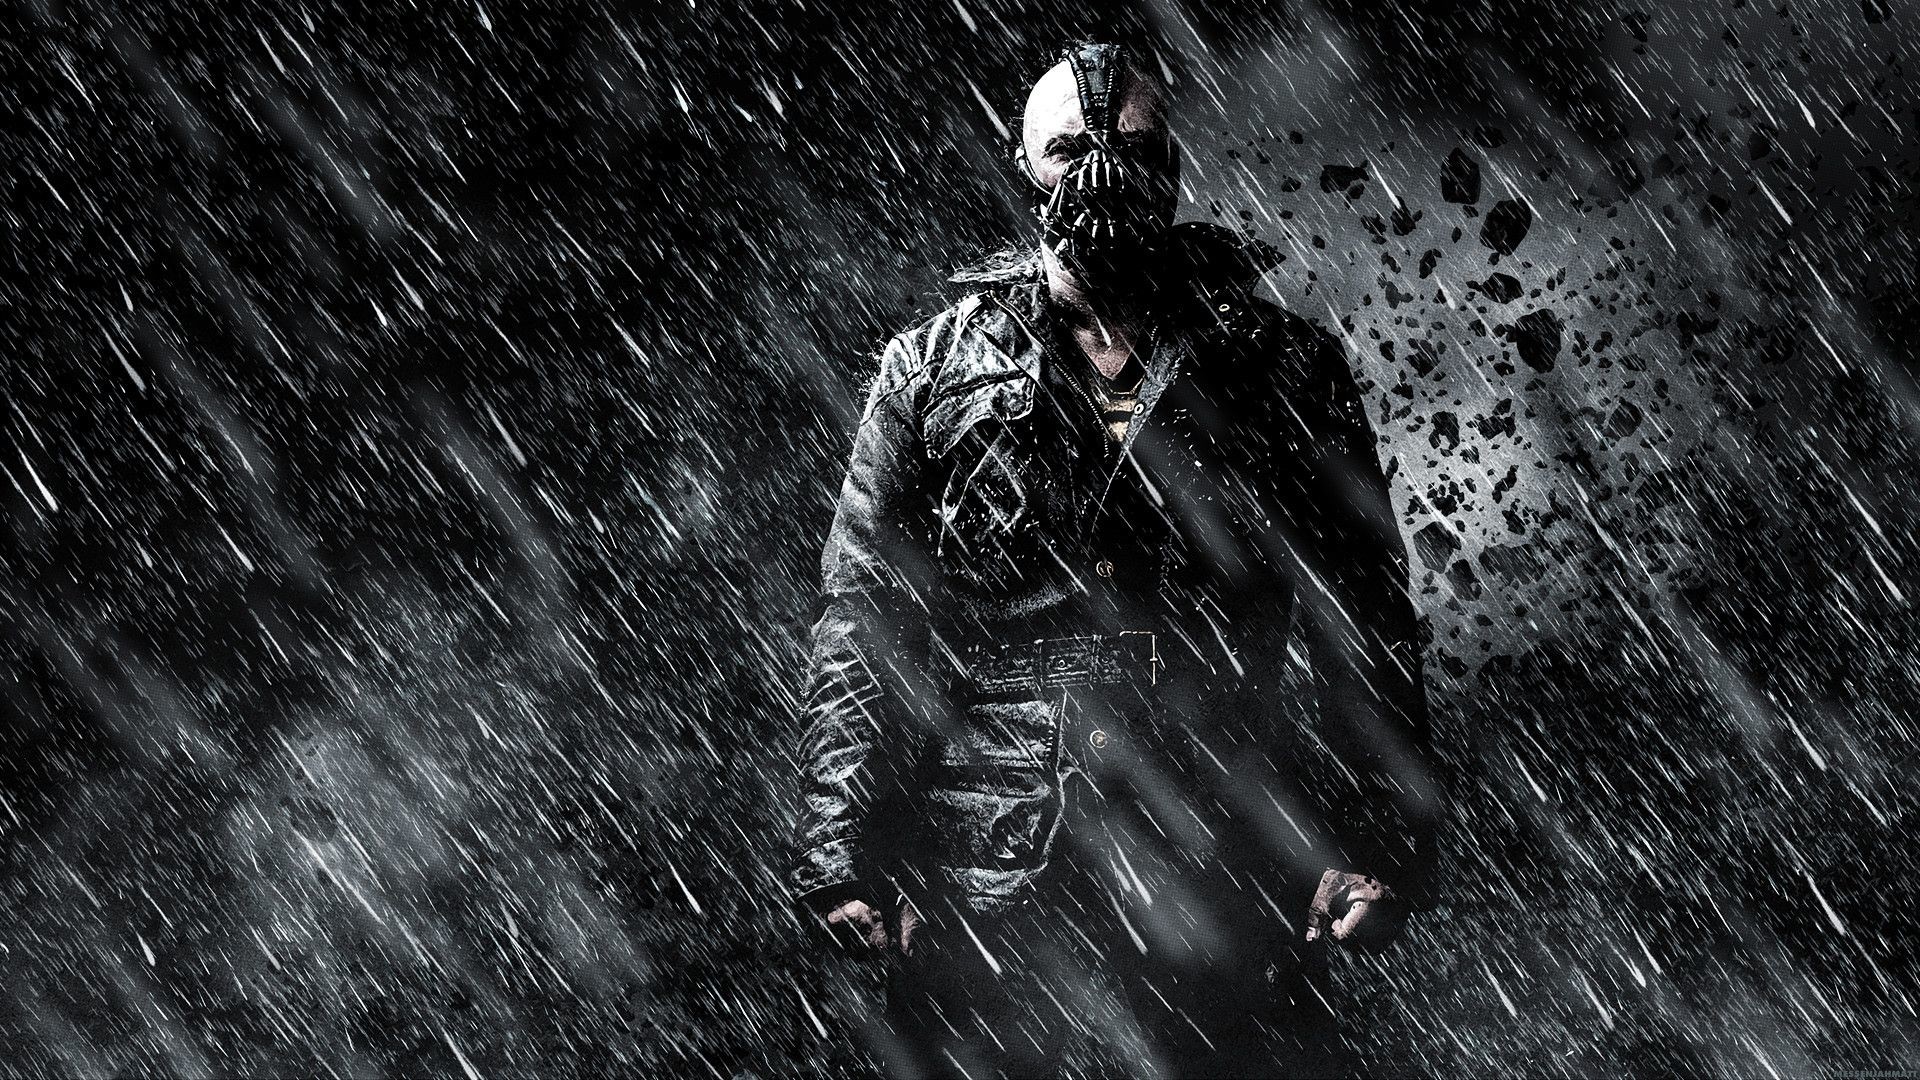 The Dark Knight Rises Wallpaper 1920x1080 80 Images